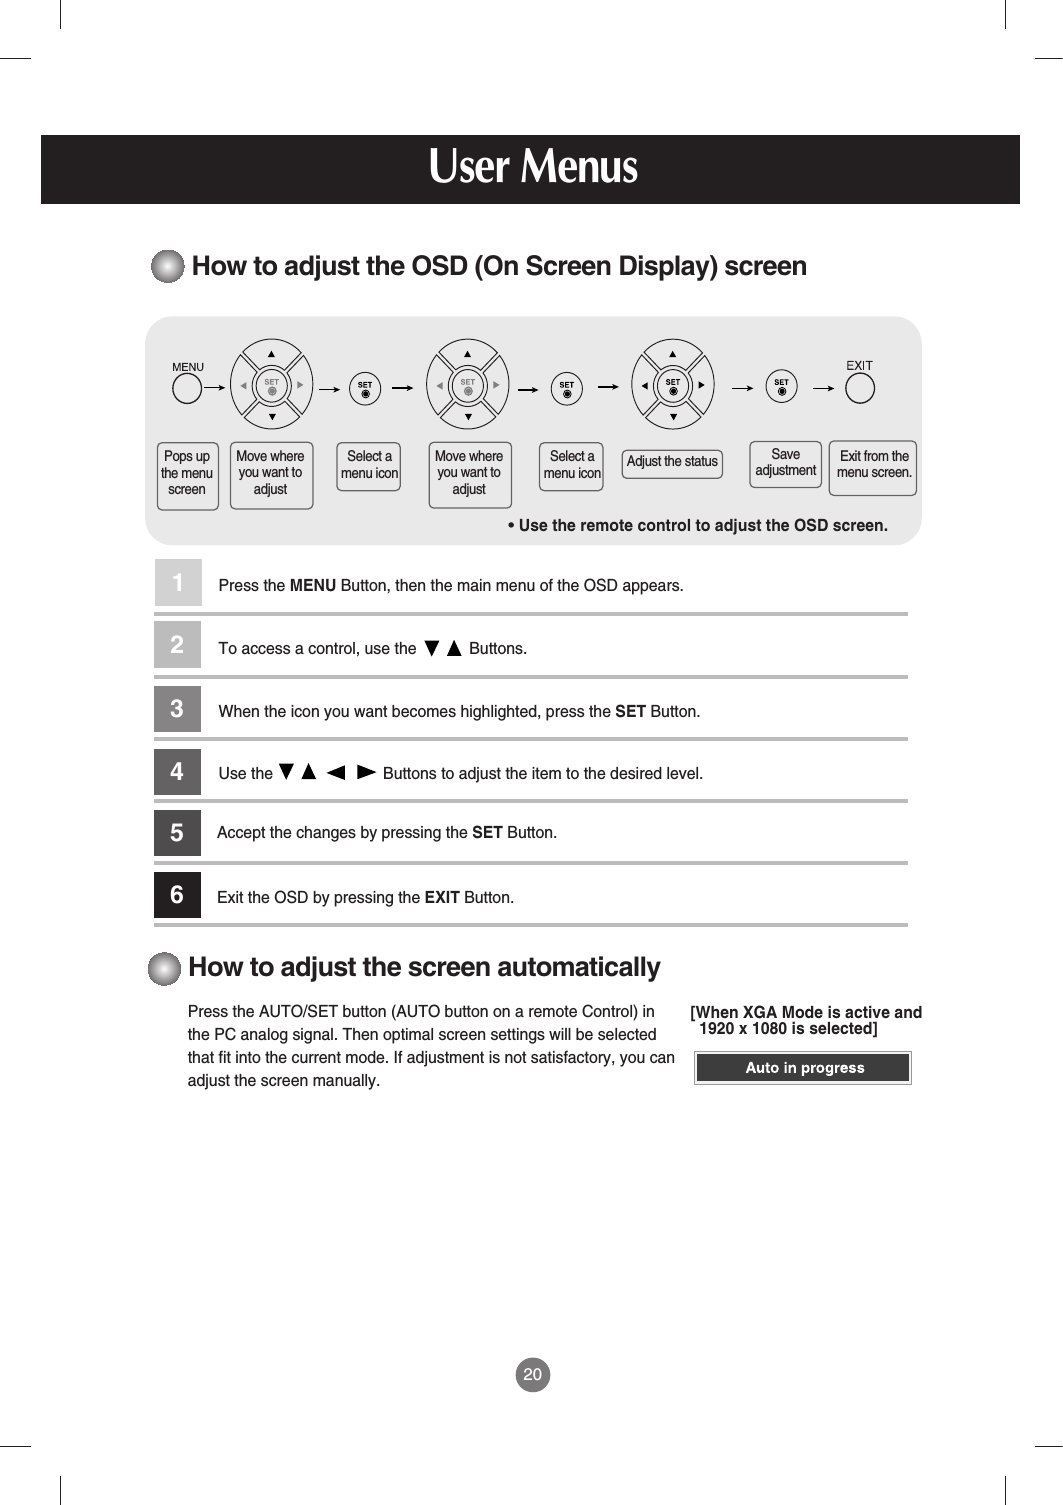 20How to adjust the OSD (On Screen Display) screen• Use the remote control to adjust the OSD screen.How to adjust the screen automaticallyPress the AUTO/SET button (AUTO button on a remote Control) inthe PC analog signal. Then optimal screen settings will be selectedthat fit into the current mode. If adjustment is not satisfactory, you canadjust the screen manually.Press the MENU Button, then the main menu of the OSD appears.To access a control, use the            Buttons. When the icon you want becomes highlighted, press the SET Button.Use the                         Buttons to adjust the item to the desired level.Accept the changes by pressing the SET Button.Exit the OSD by pressing the EXIT Button.123456Pops upthe menuscreenMove whereyou want toadjustMove whereyou want toadjustSelect amenu iconSelect amenu icon Adjust the status SaveadjustmentExit from themenu screen.User Menus[When XGA Mode is active and1920 x 1080 is selected]